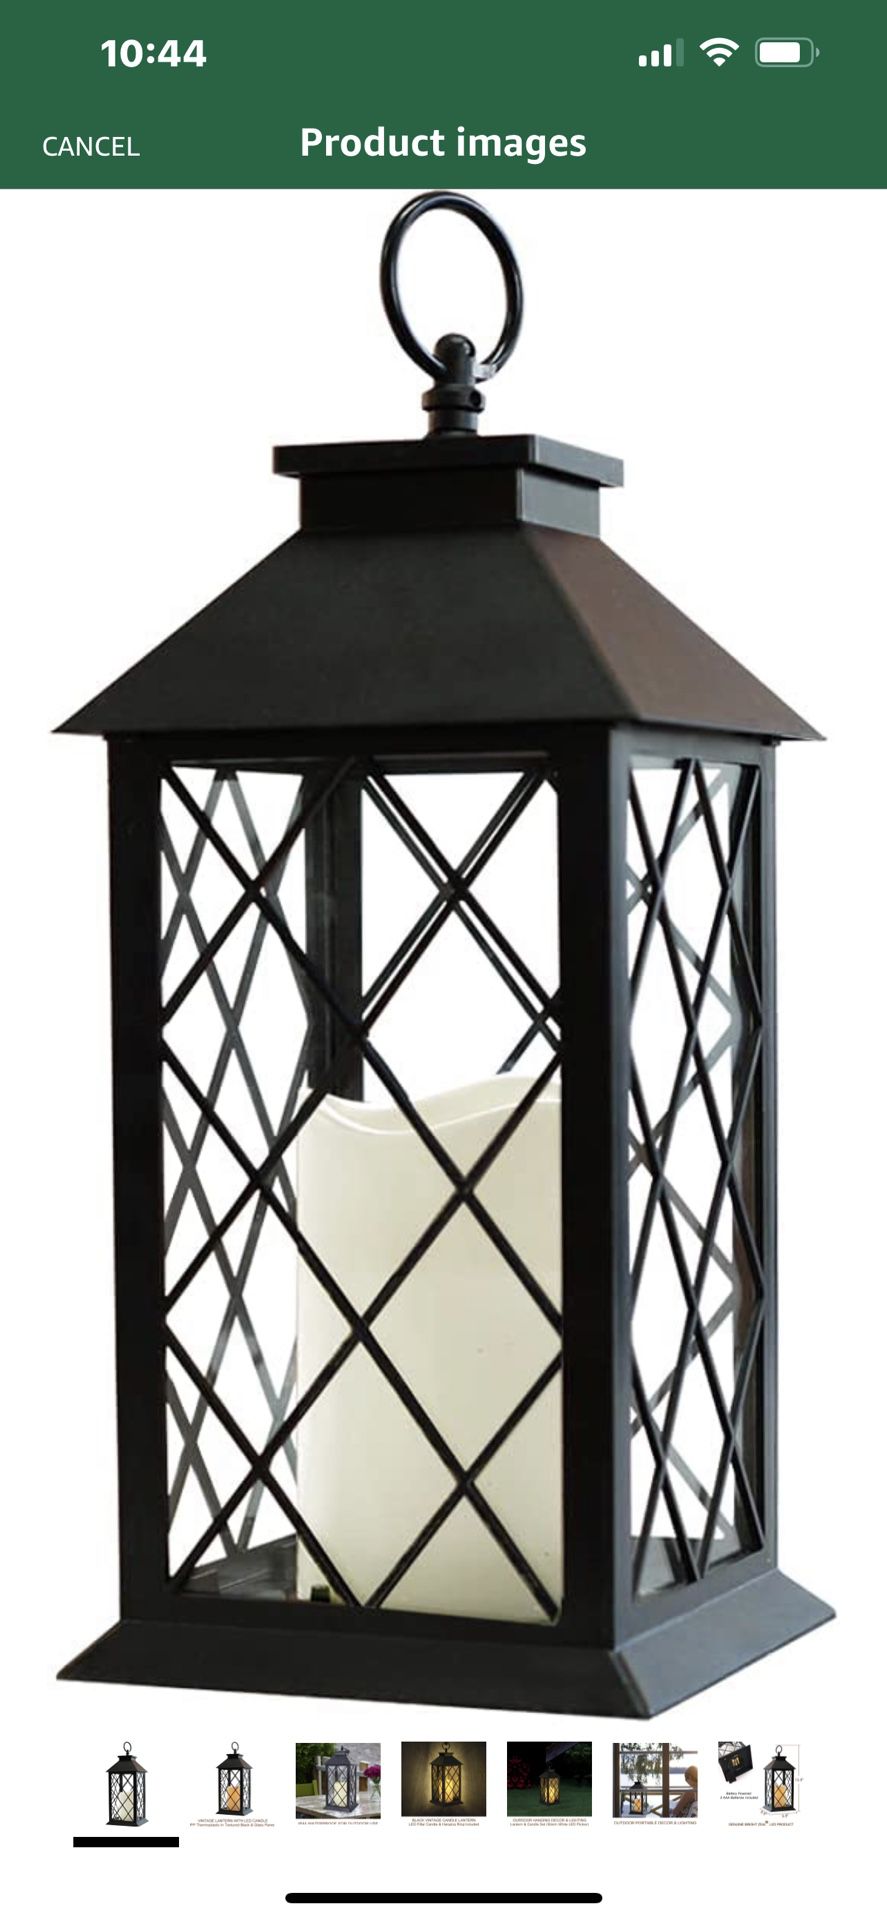 Bright Zeal 13.5" Black Vintage Candle Lantern with LED Pillar Candle and Timer - IP44 Waterproof Candle Lantern Outdoor Decorative Hanging Lantern Po